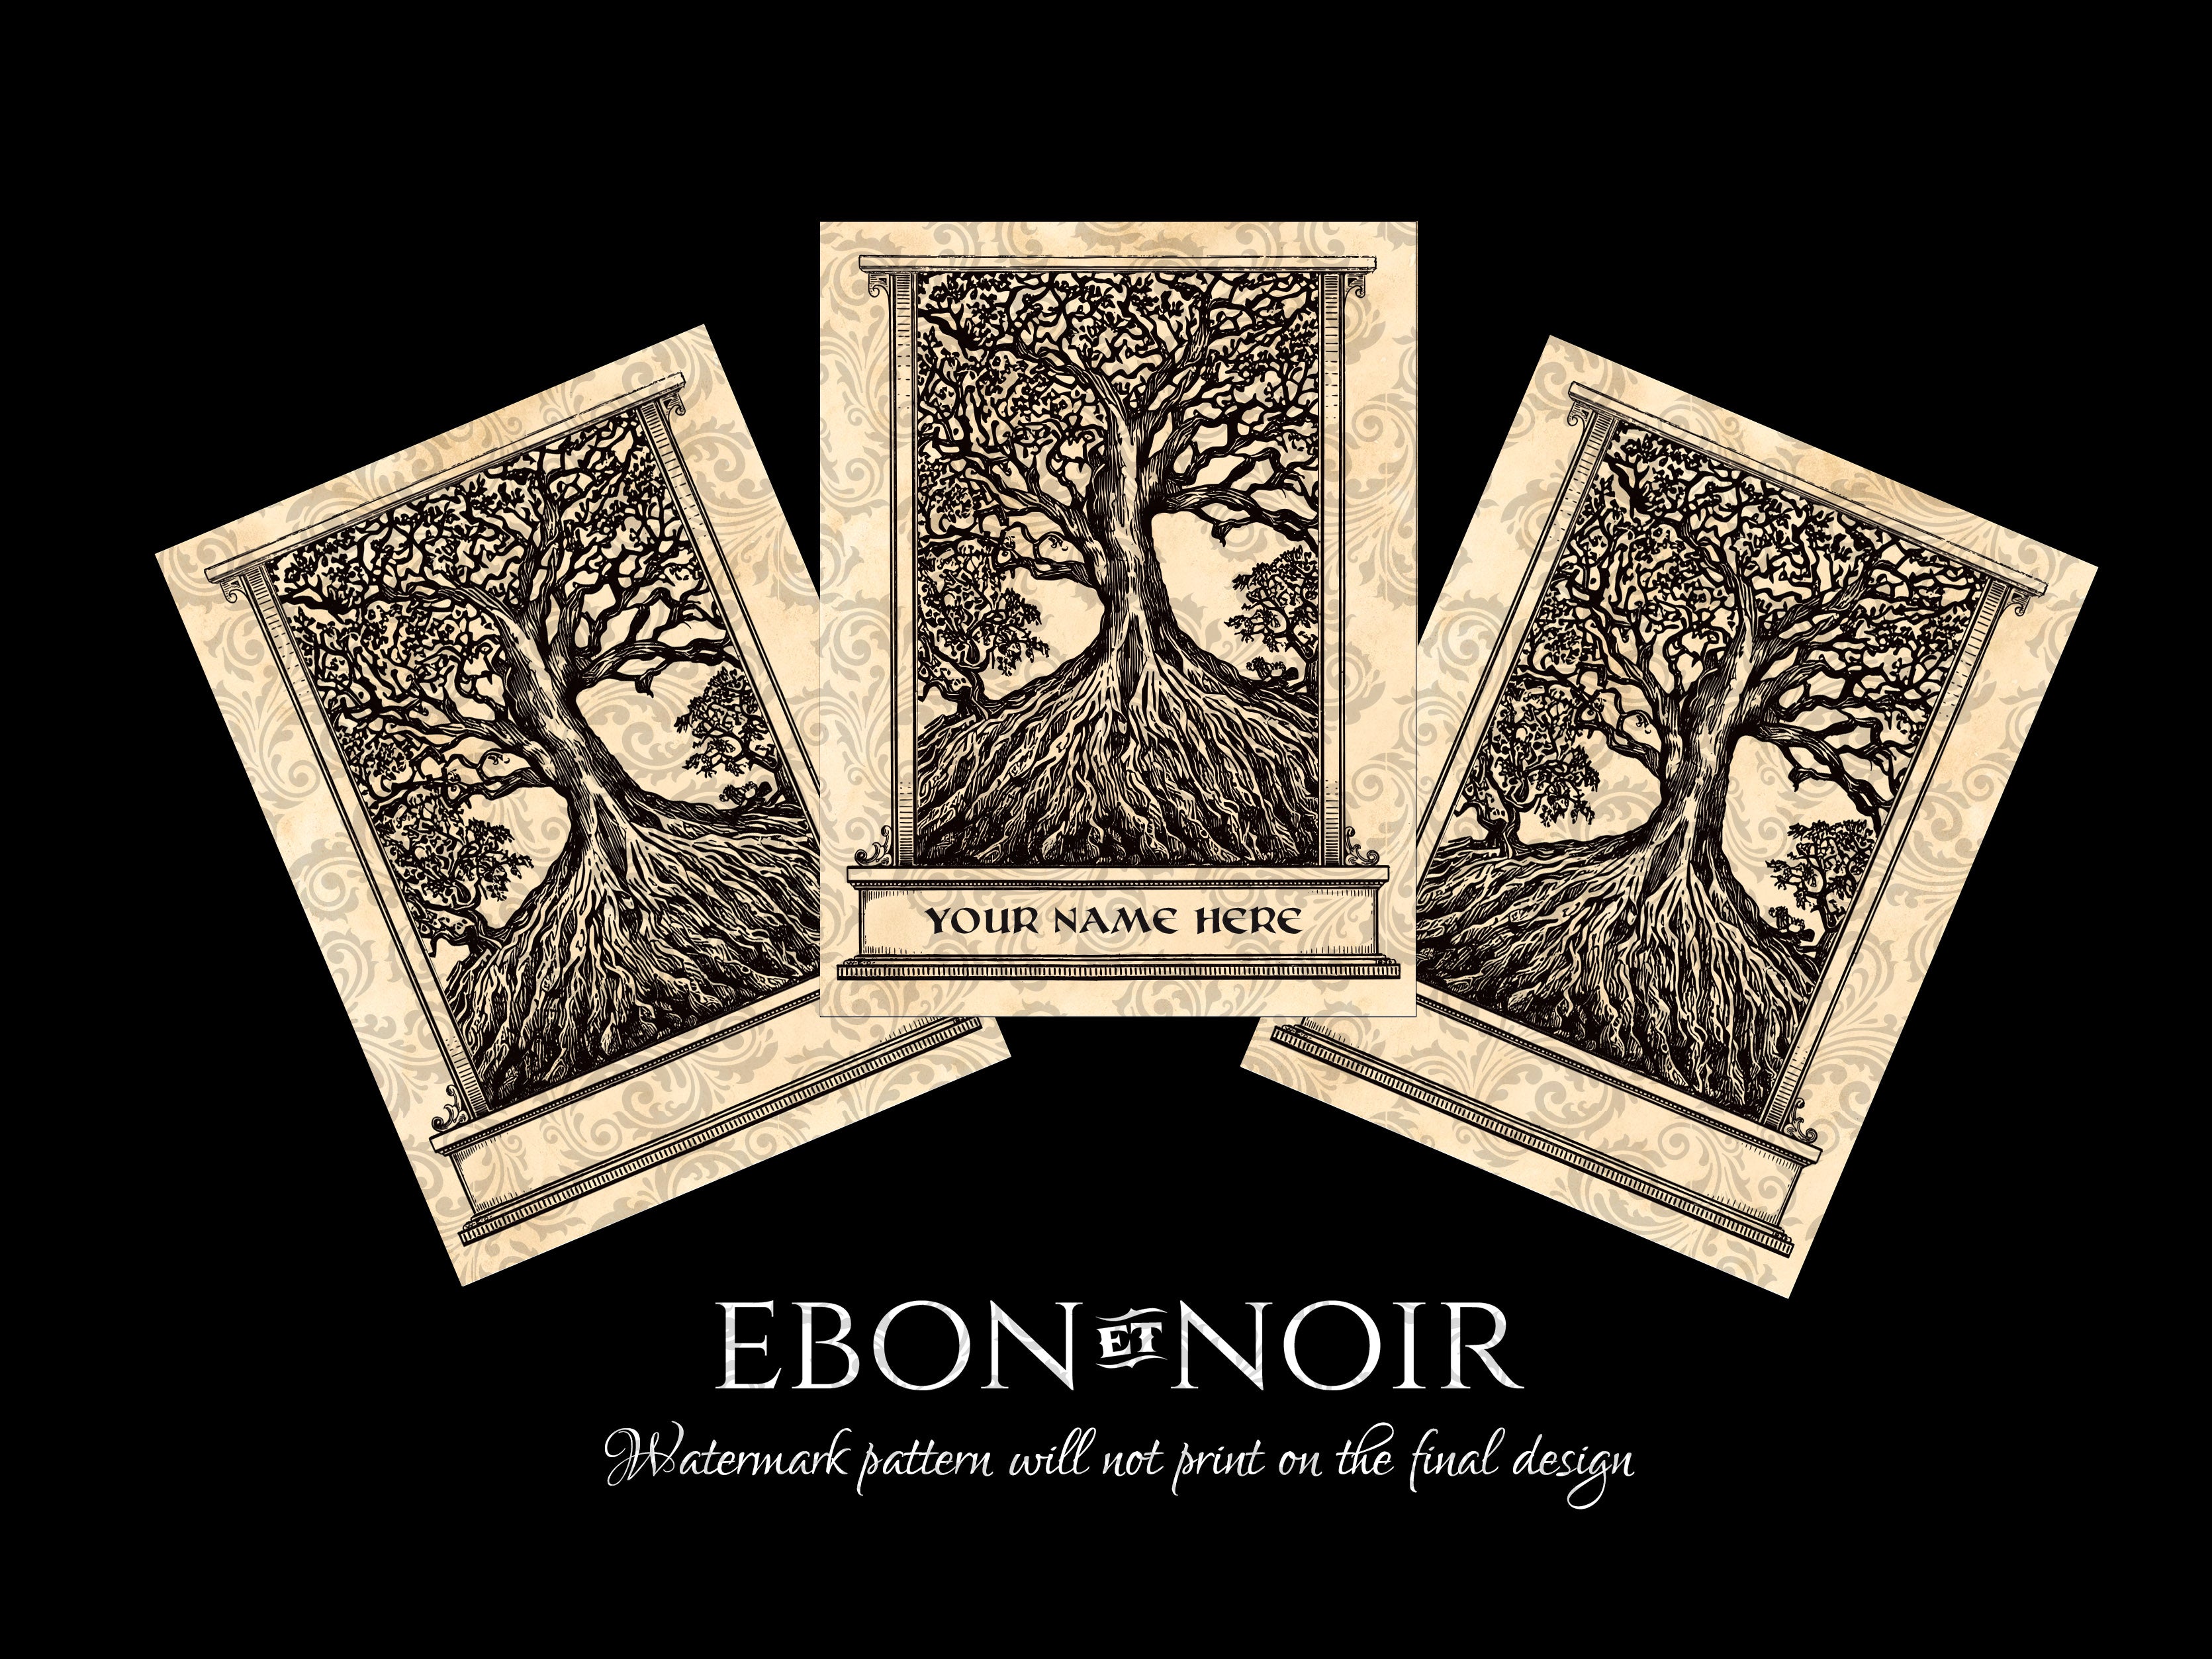 Ancient Gnarled Tree of Knowledge, Personalized Ex-Libris Bookplates, Crafted on Traditional Gummed Paper, 3in x 4in, Set of 30